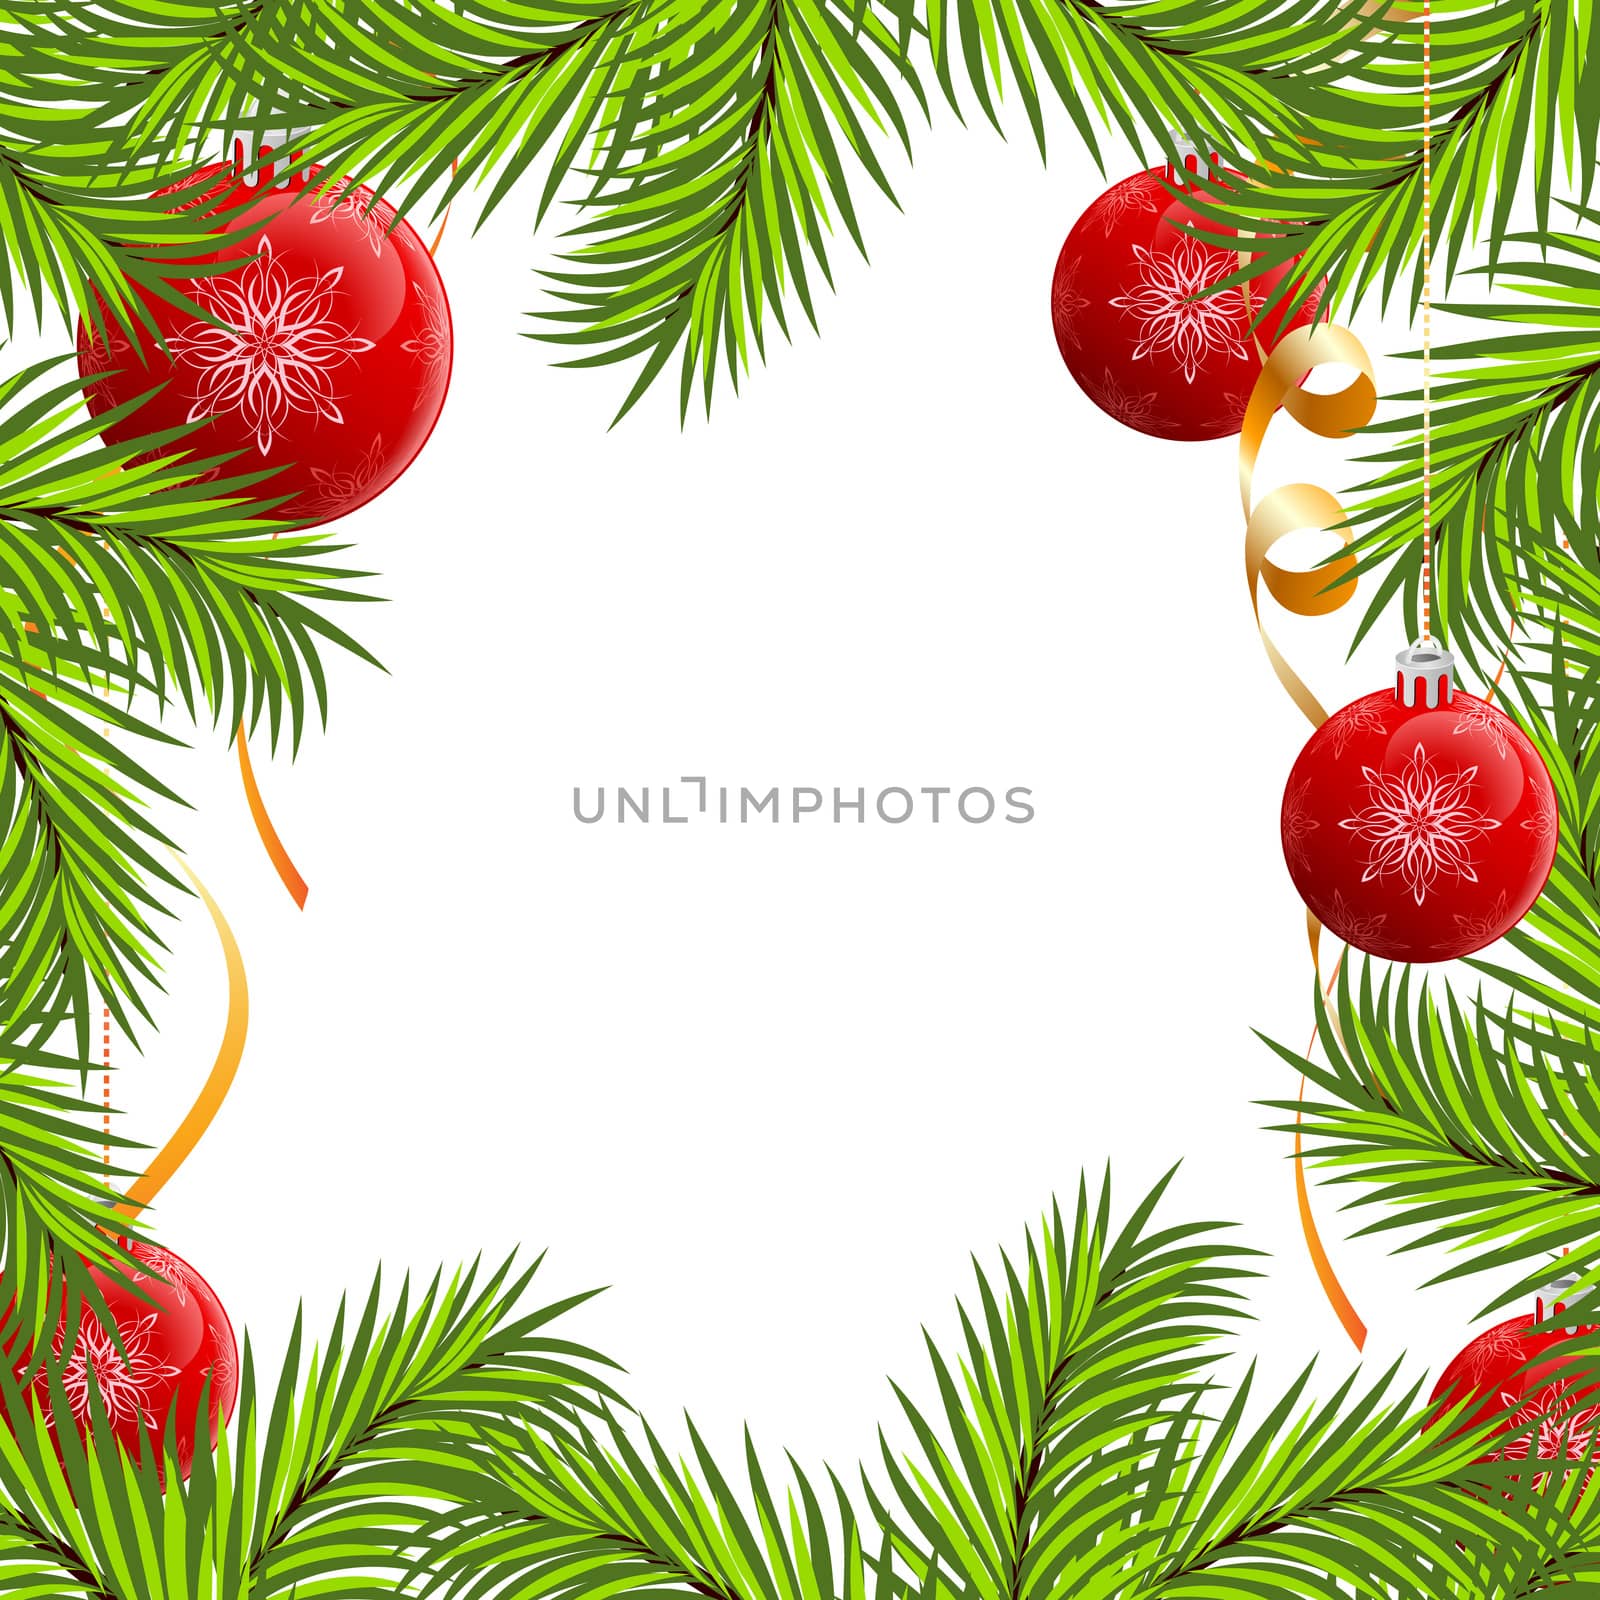 Fir framing ���� baubles isolated on white background